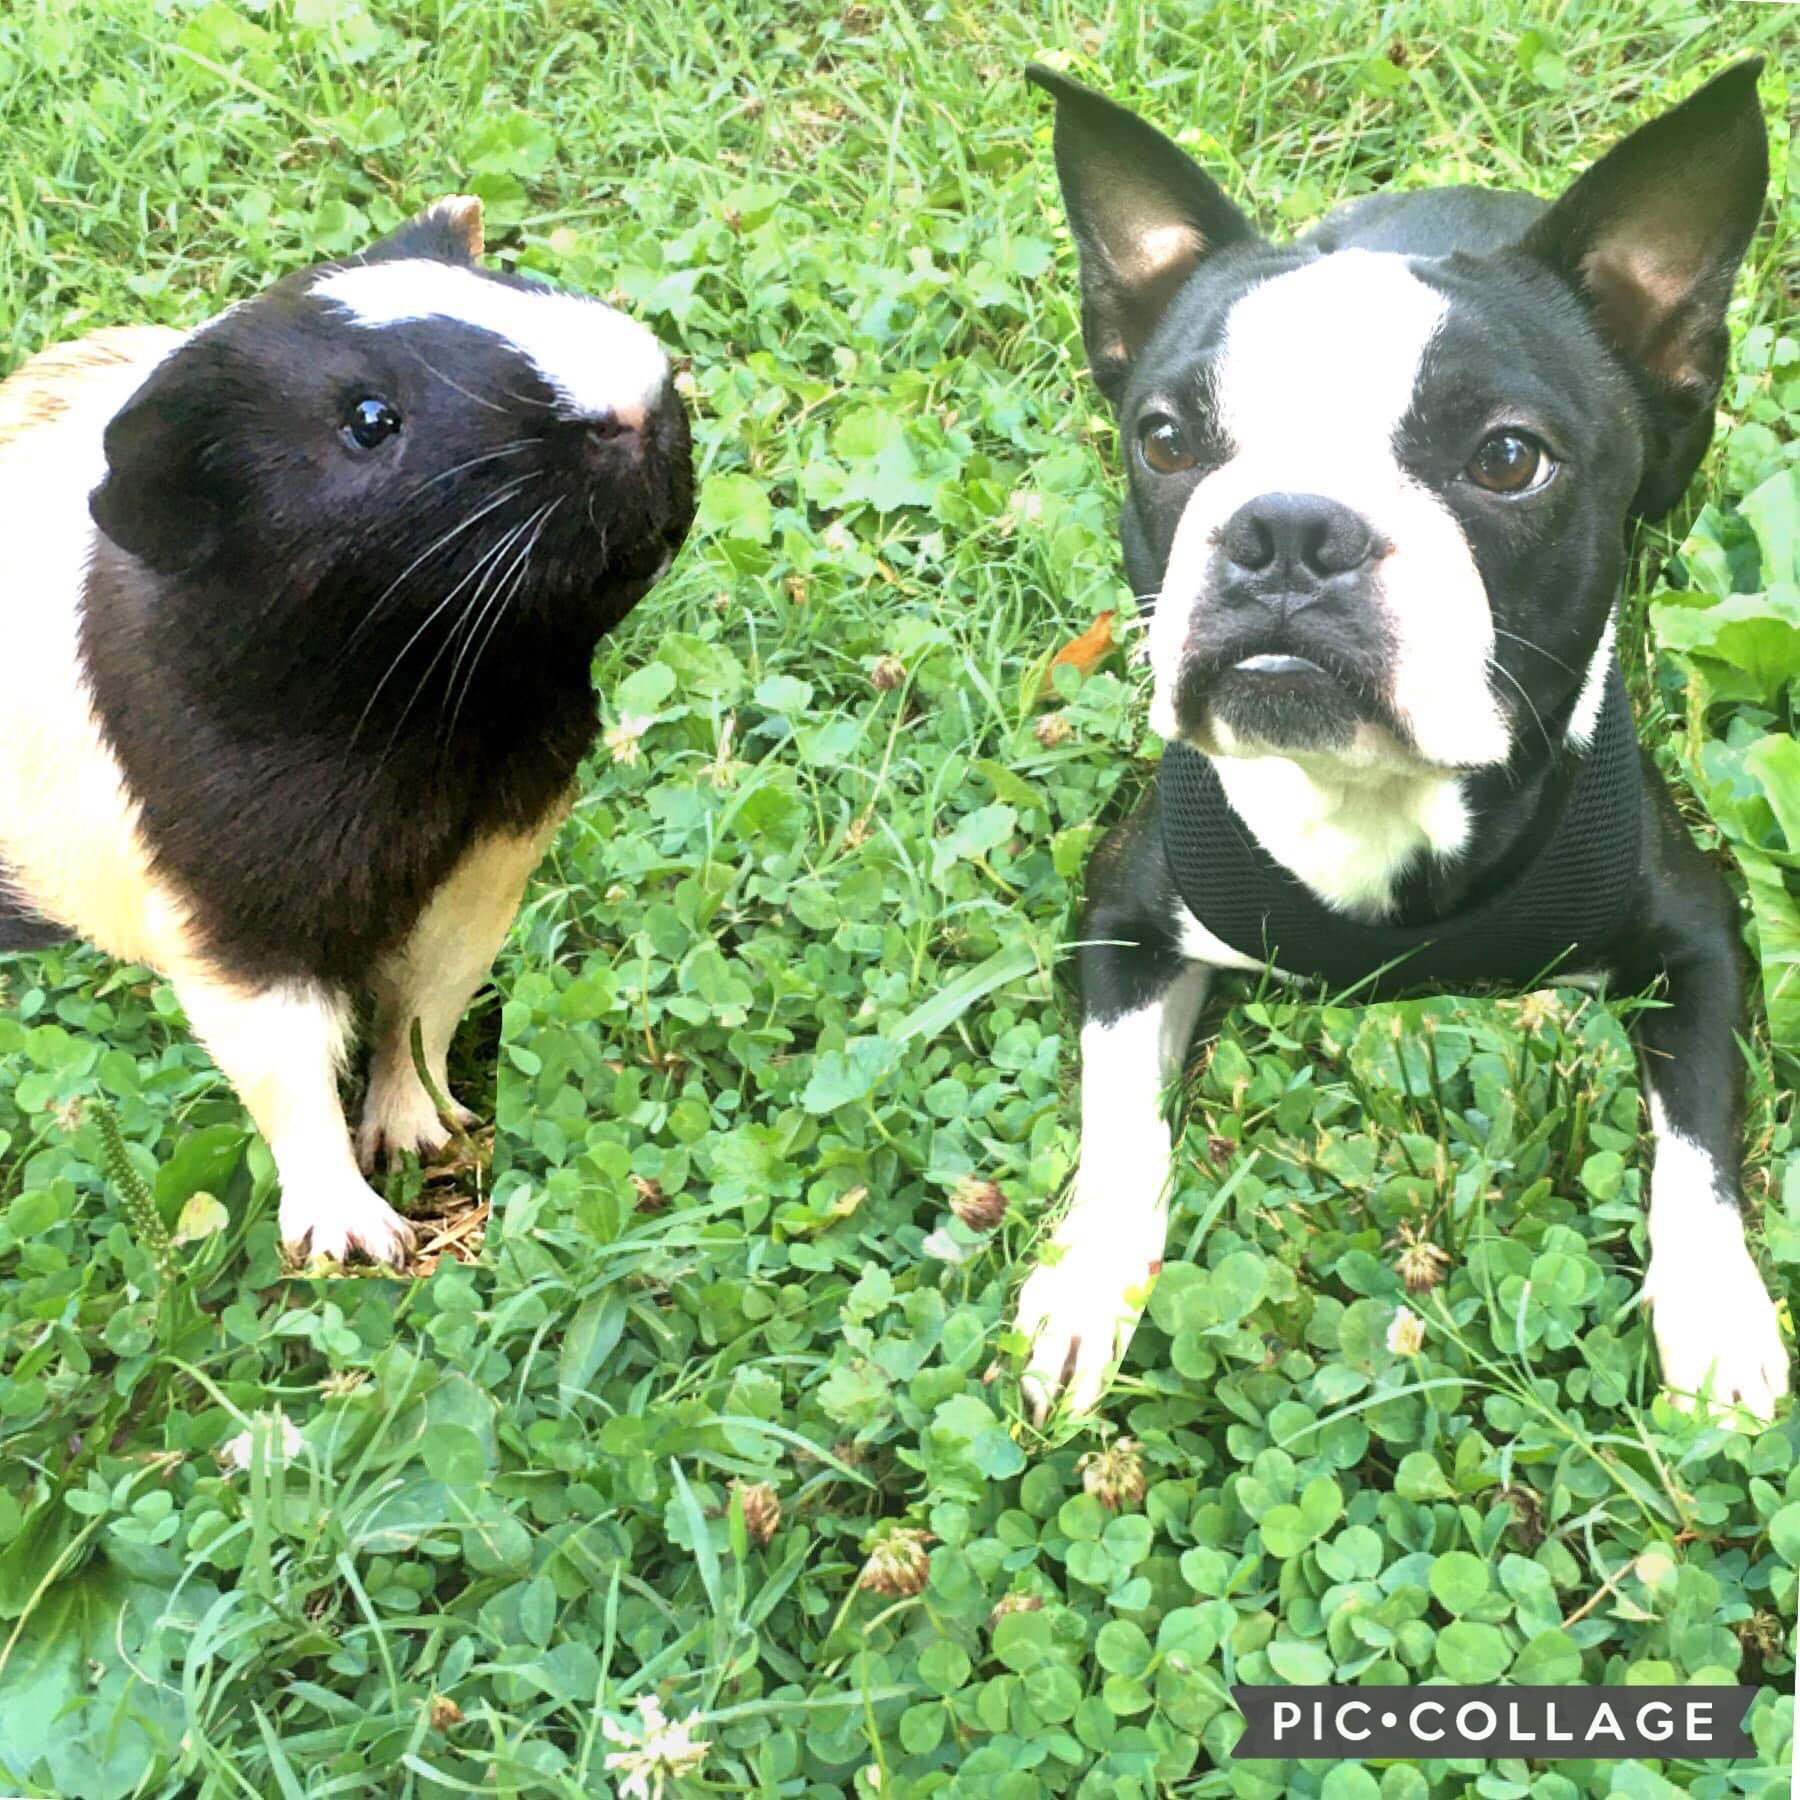 The Cutest Guinea Pig ❤️ And the Cutest Puppy. @puppyduppy2019 ok insta❤️